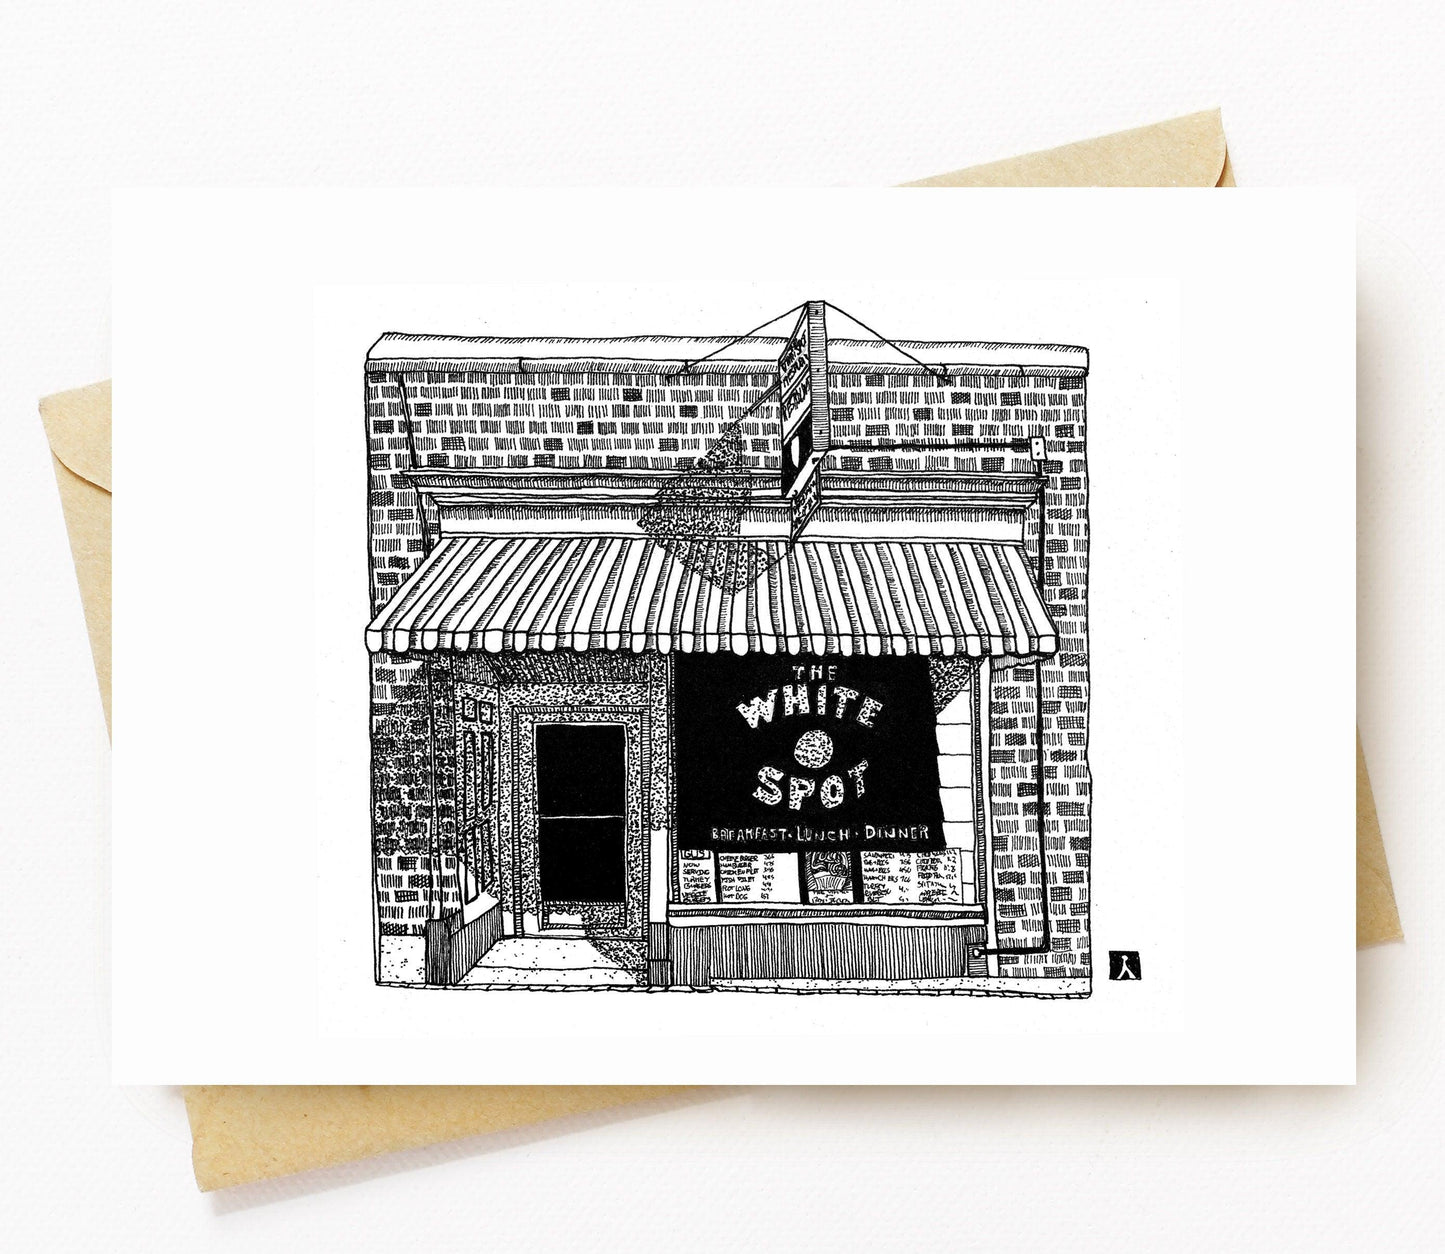 BellavanceInk: Greeting Card With A Pen & Ink Drawing Of The White Spot Diner in Charlottesville, Virginia  5 x 7 Inches - BellavanceInk